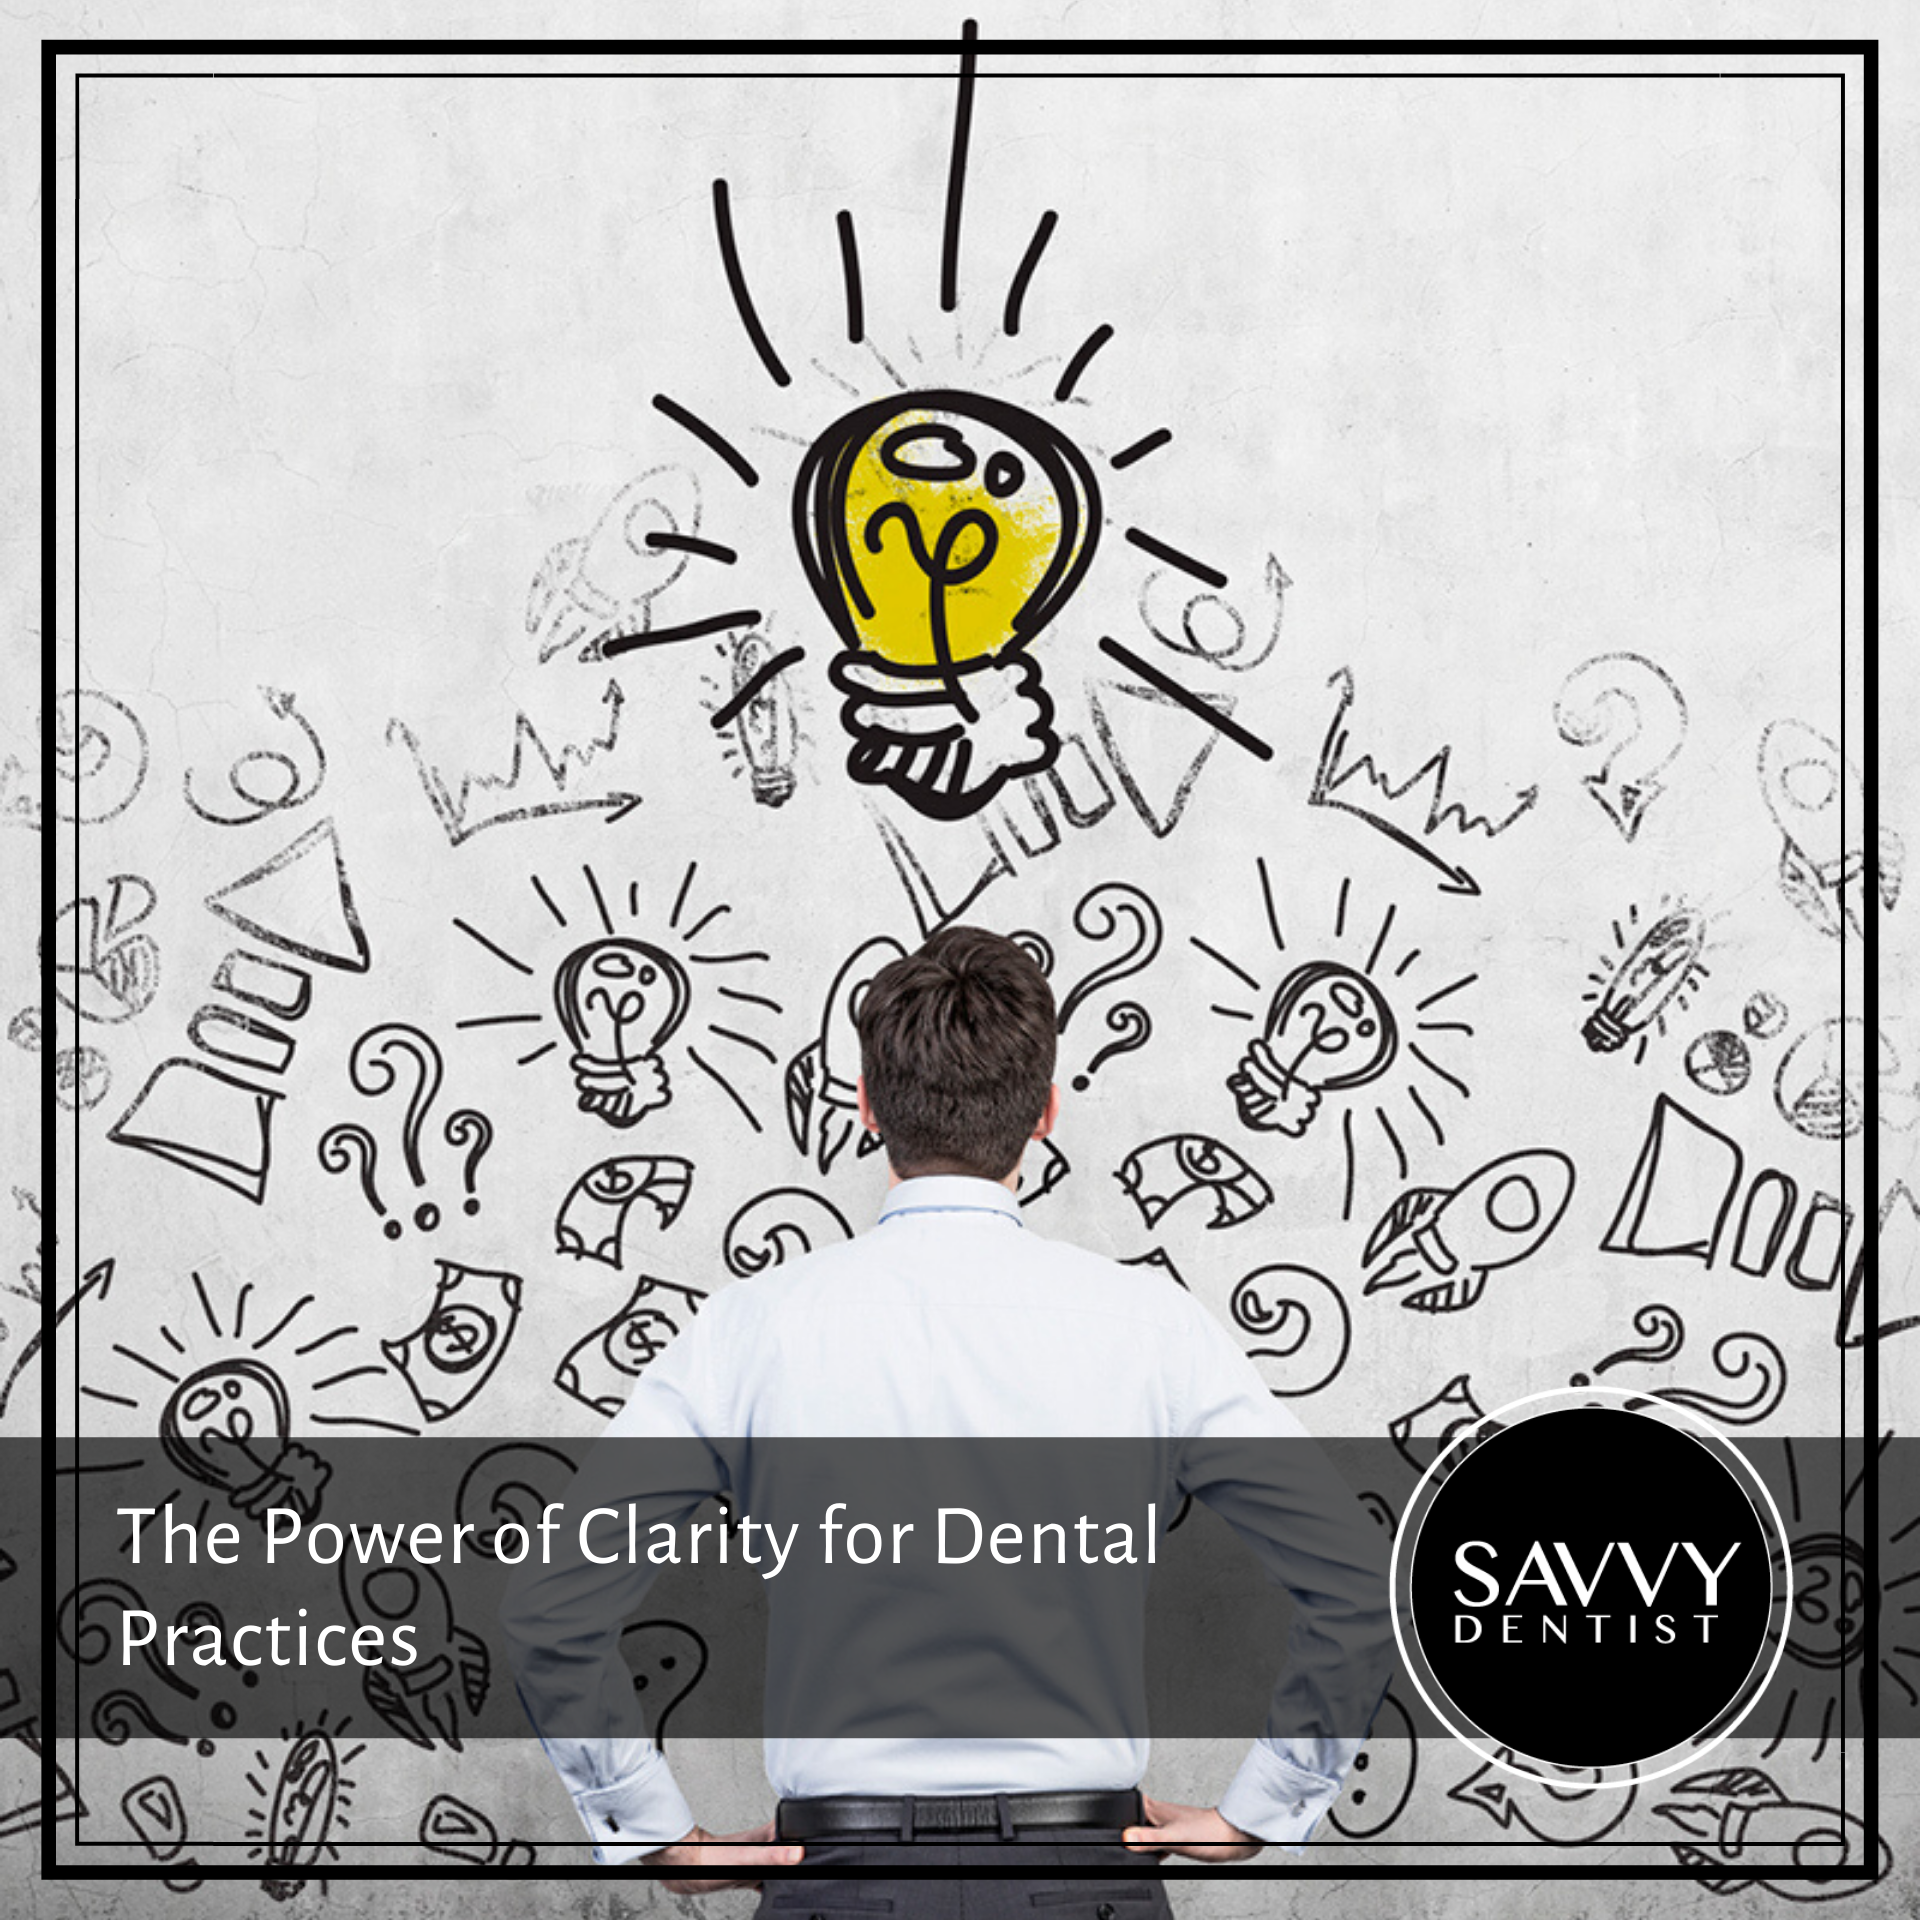 THE POWER OF CLARITY FOR DENTAL PRACTICES